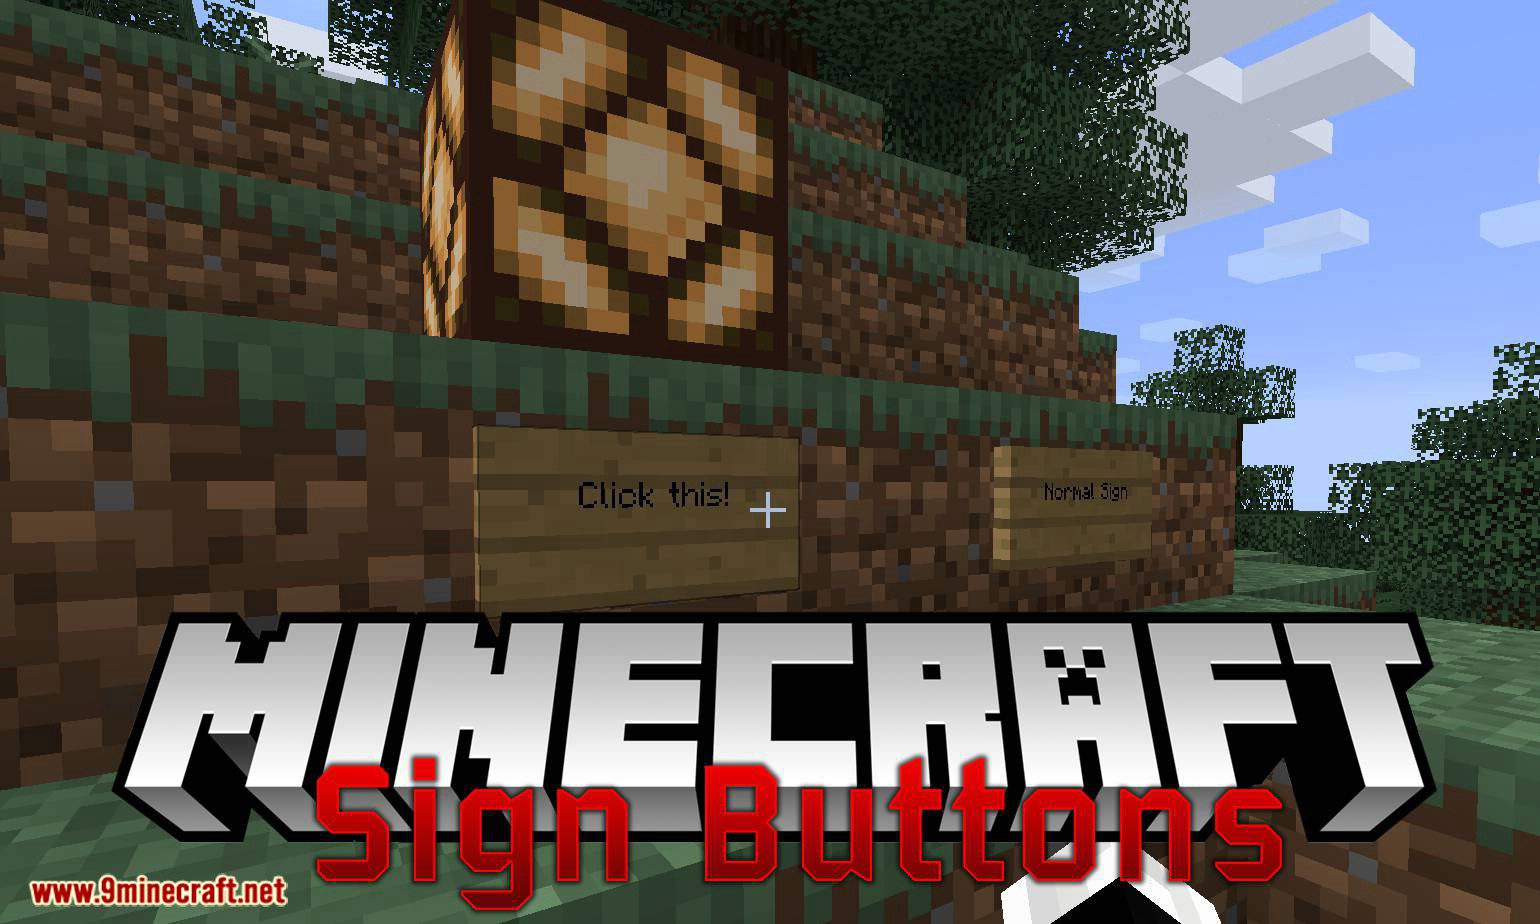 Sign Buttons mod for minecraft logo